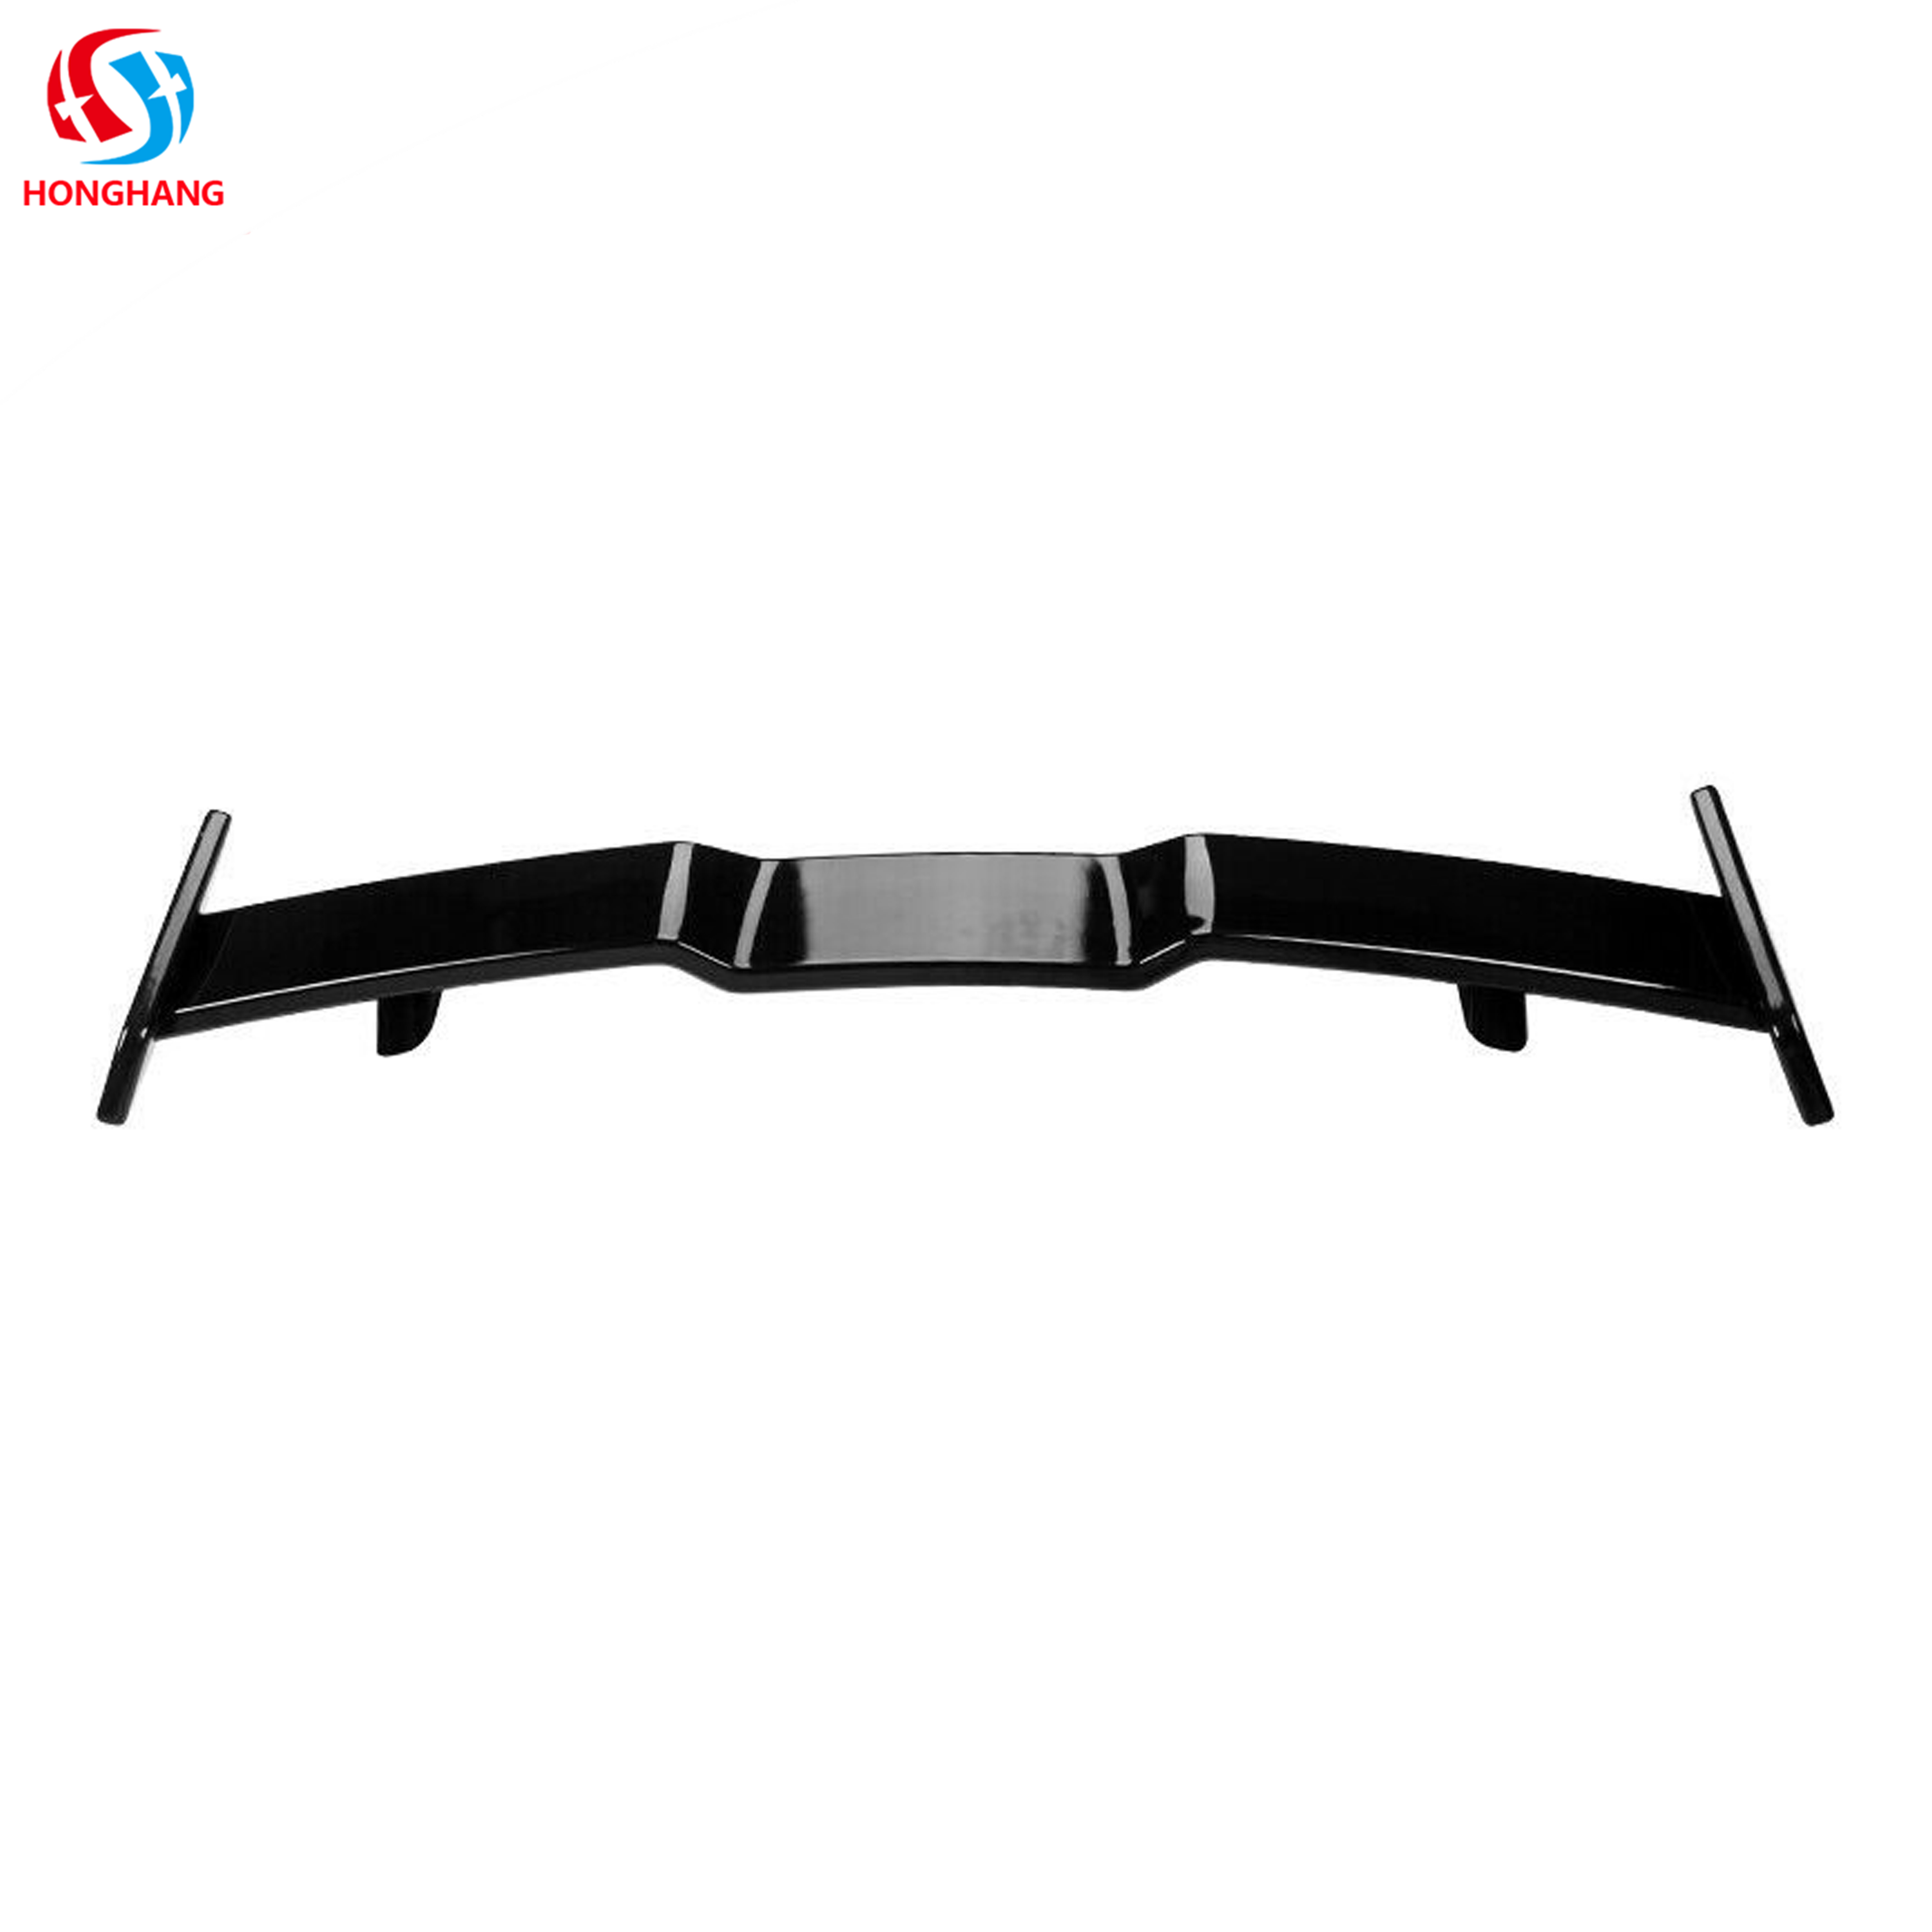 TRD Style Rear Spoiler for Toyota Camry 2018-2020 